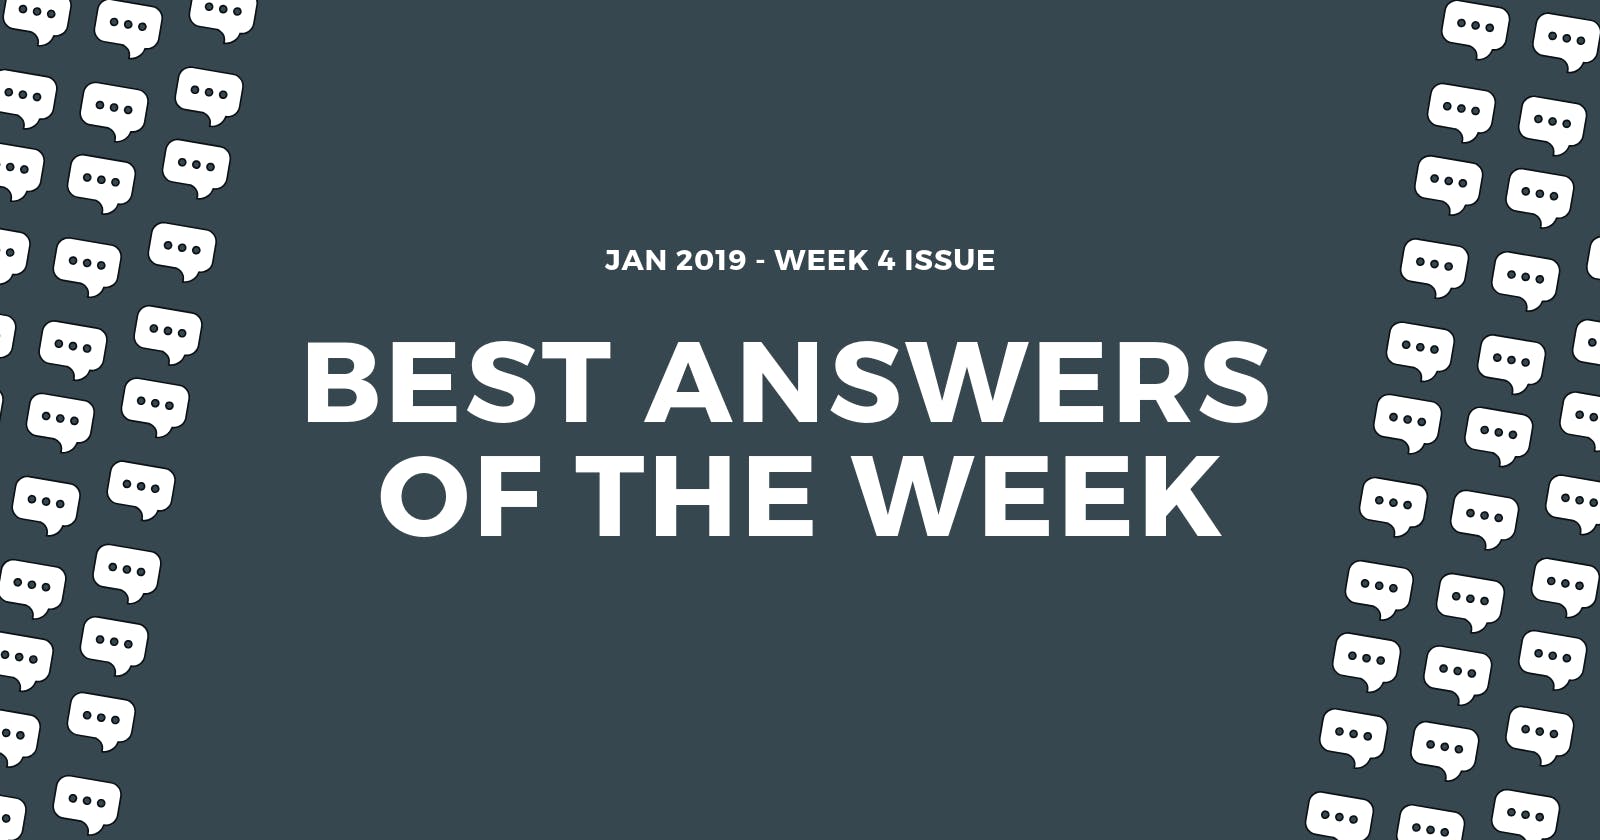 Best answers of the week: January 2019 (Week 4)